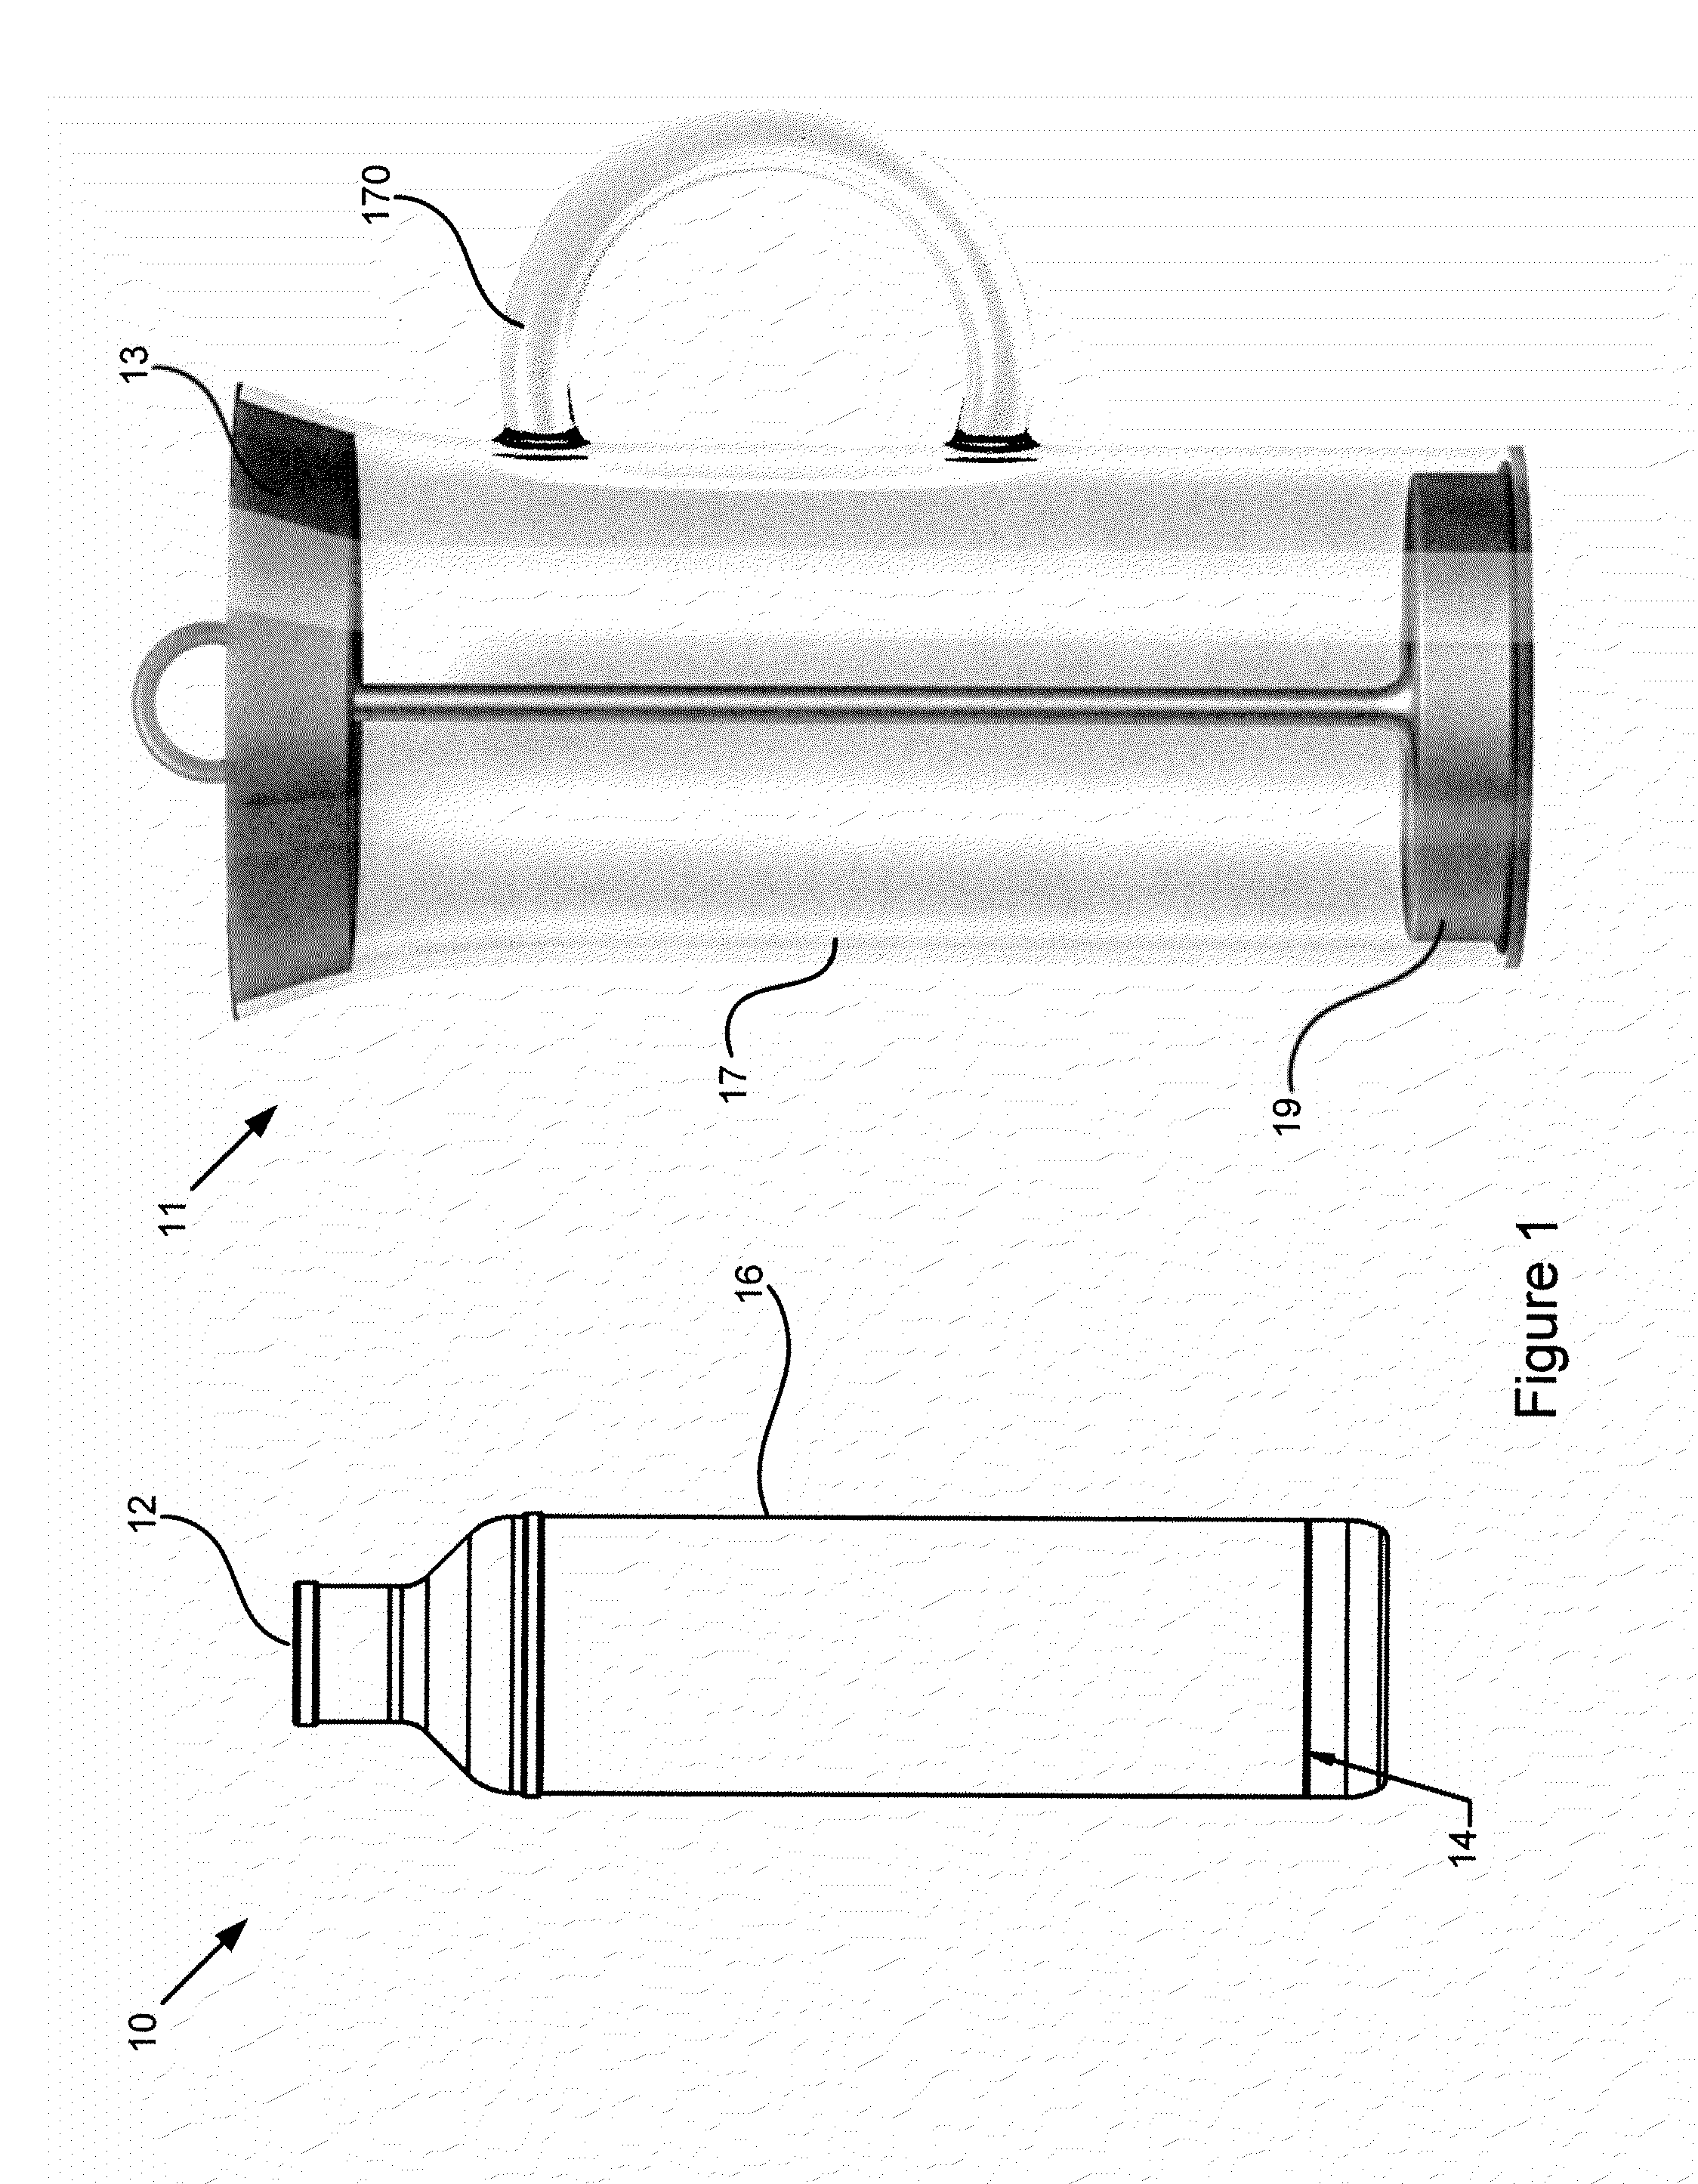 Systems and methods for personal water filtration